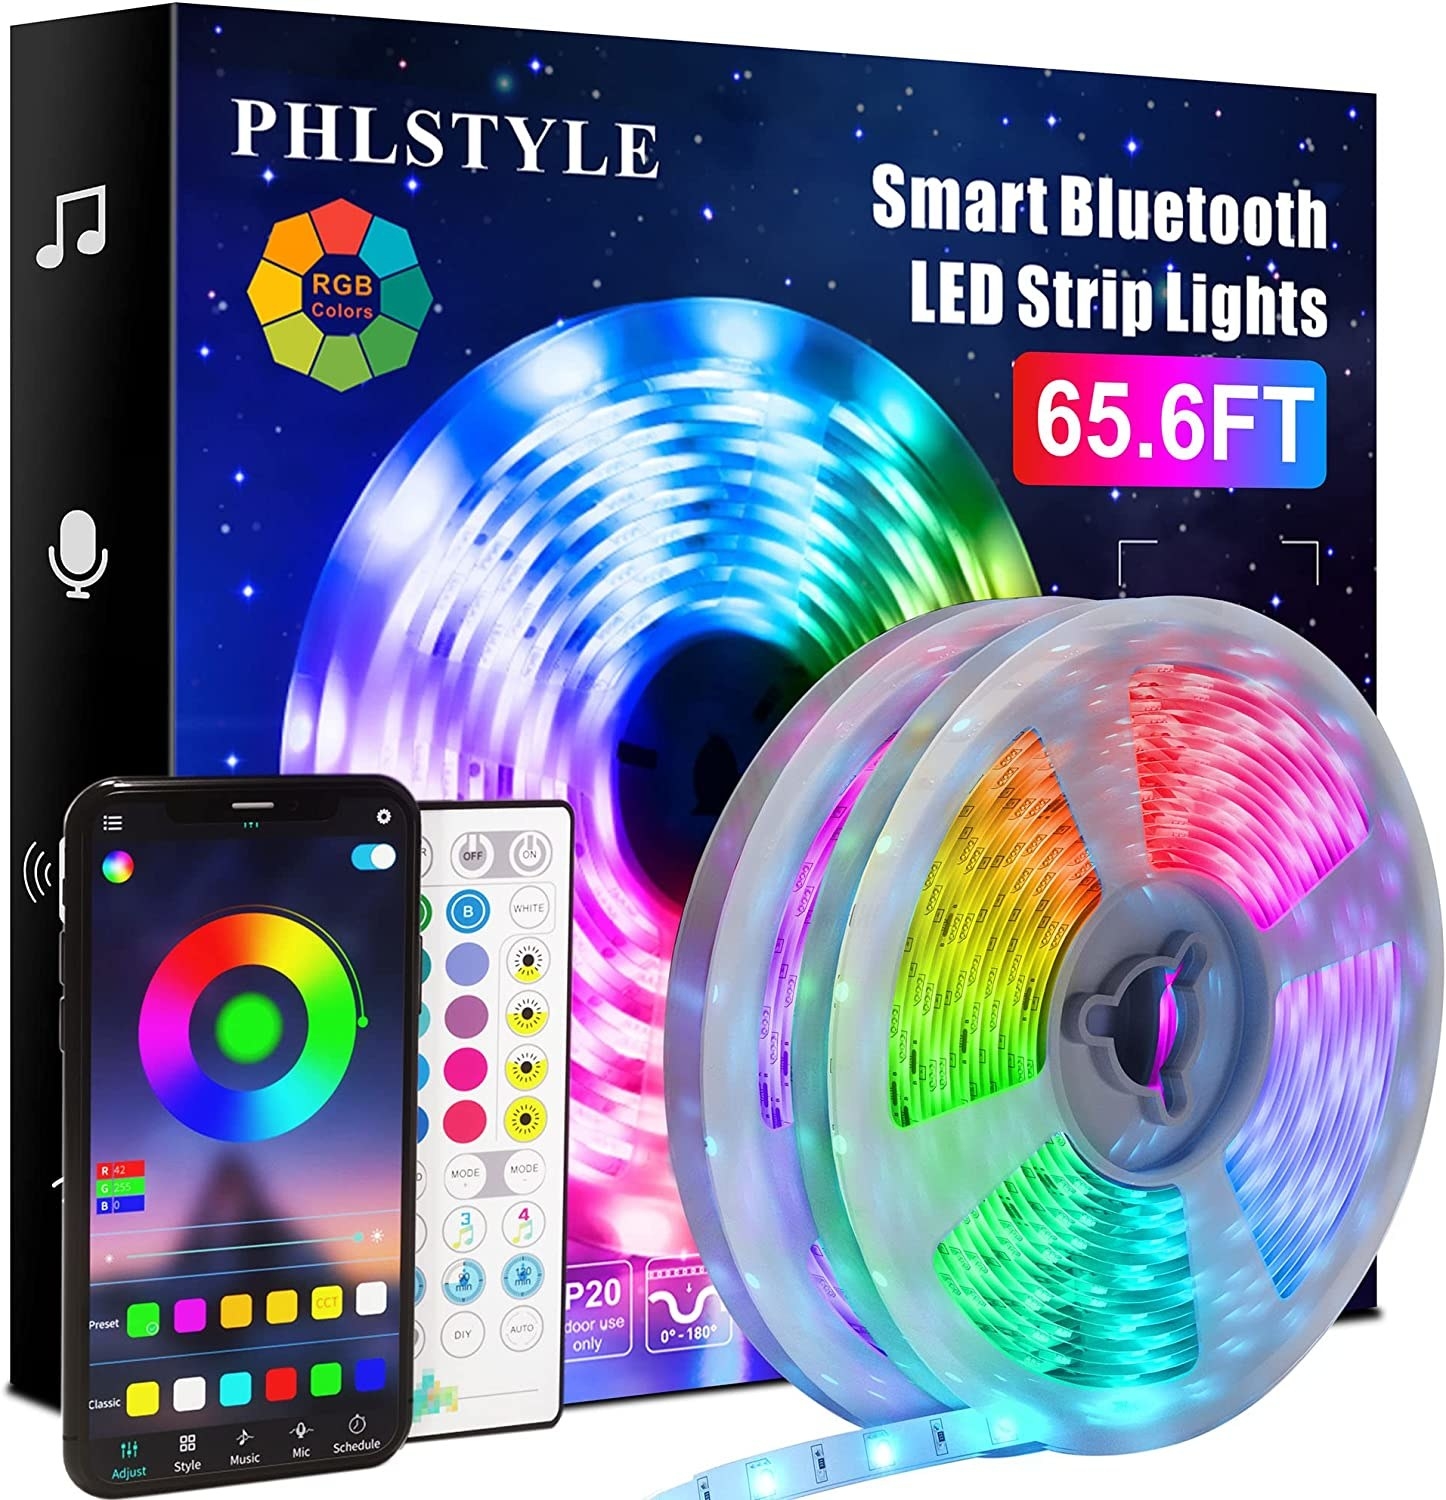 two rolls of led light strips next to a phone showing the app they connect to, a remote, and their packaging